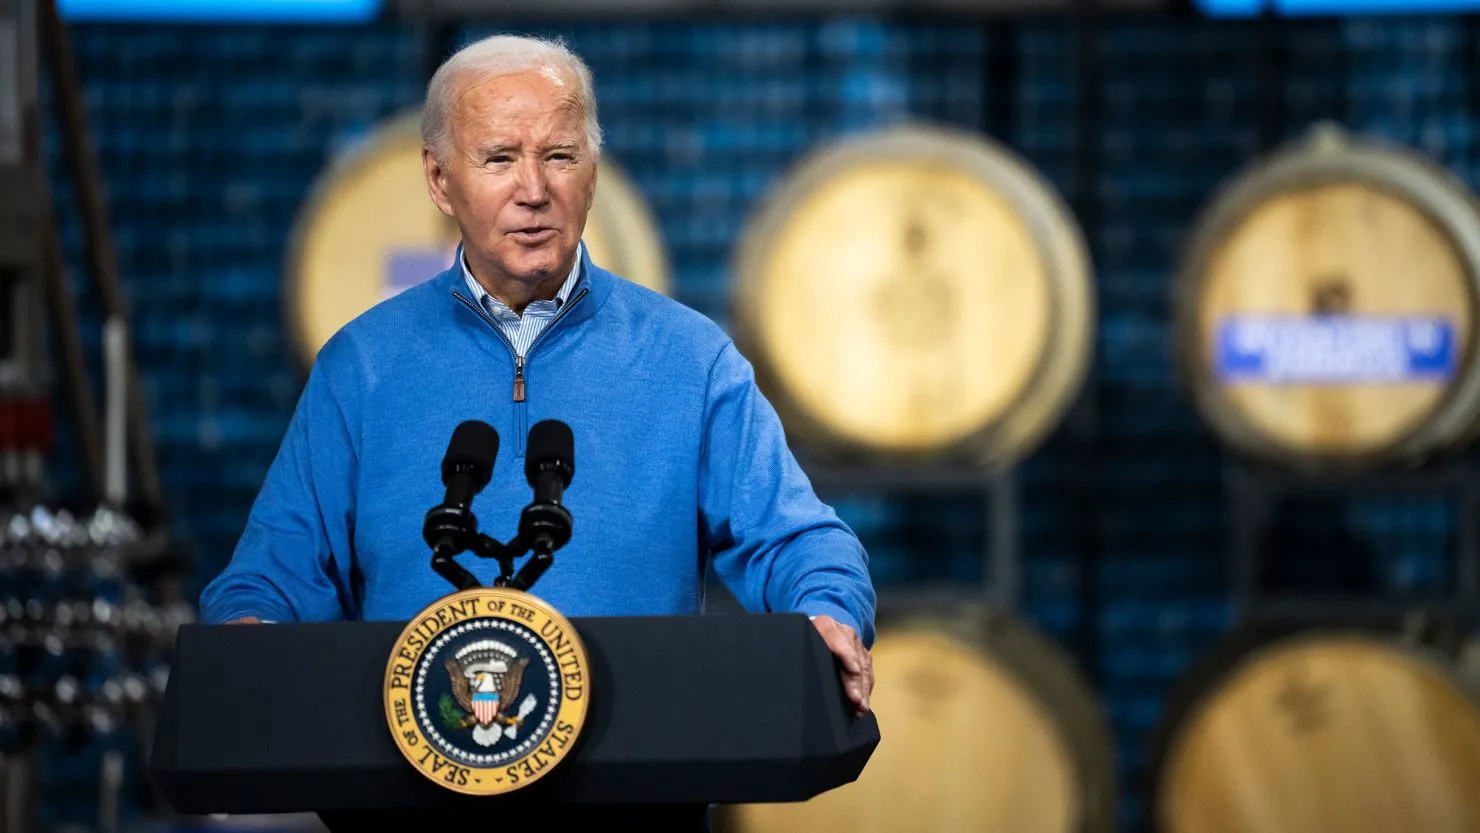 Biden Criticizes Trump's Infrastructure Track Record During a Proactive Midwest Campaign